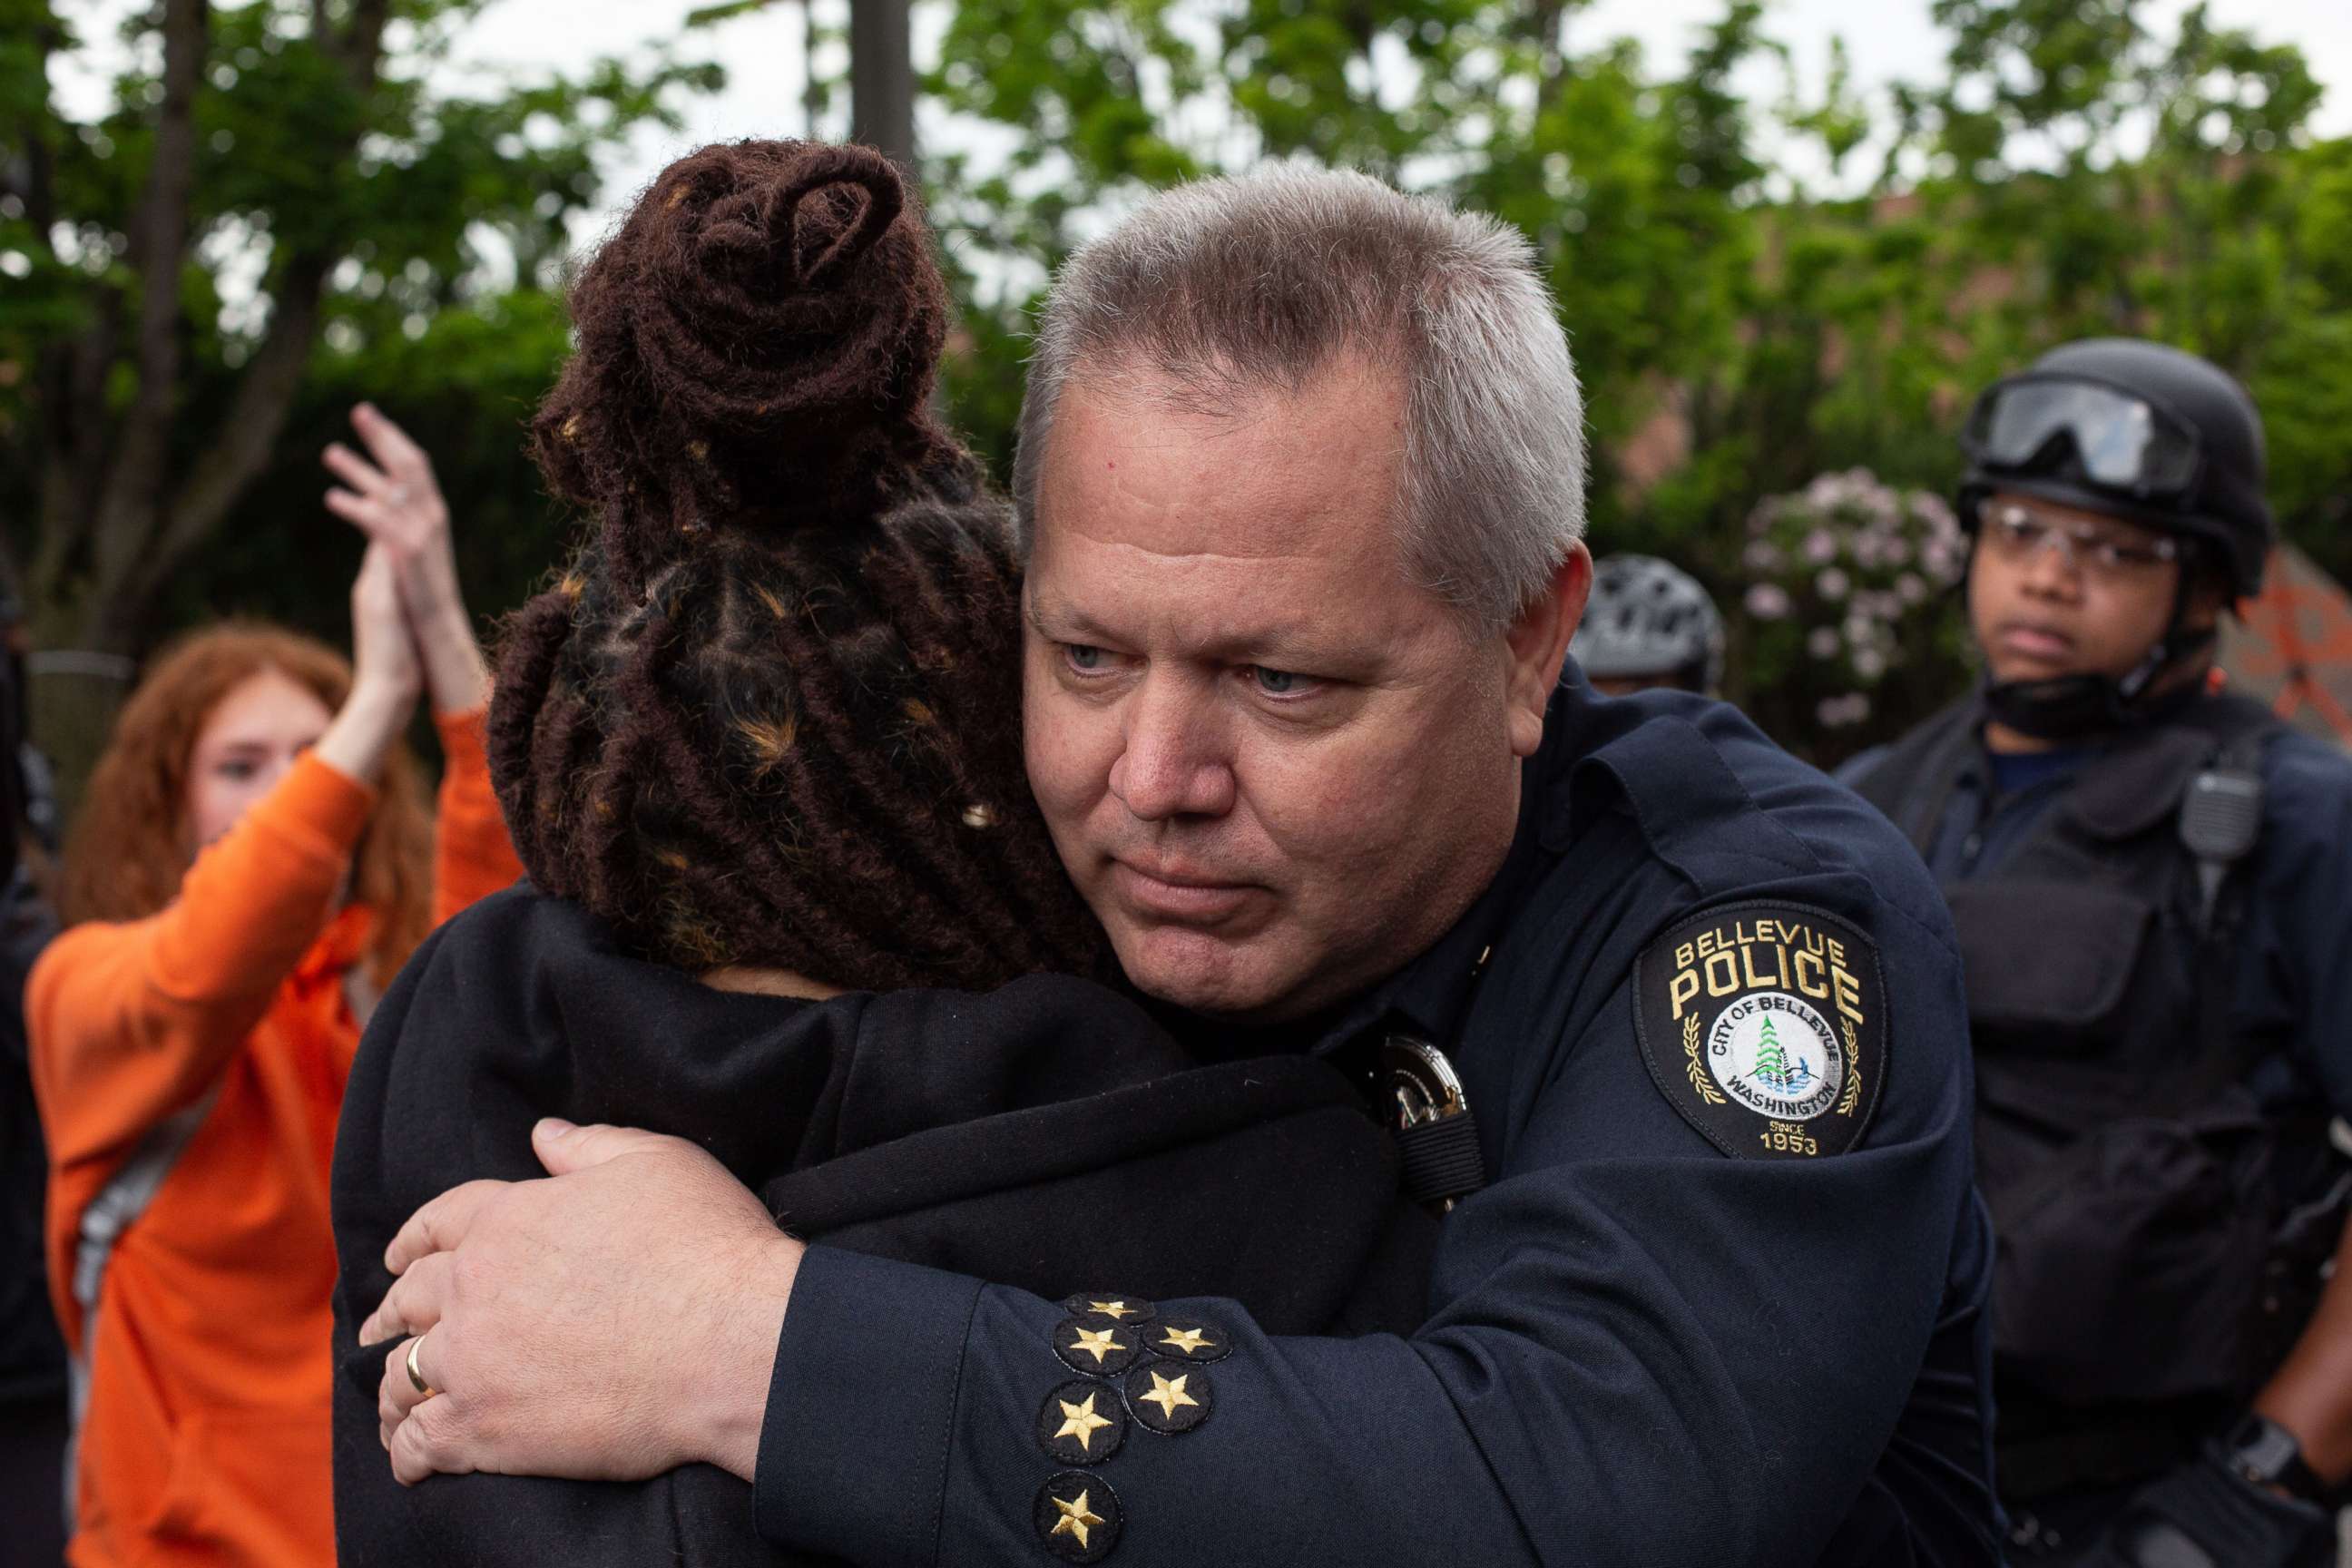 PHOTO: Bellevue Police Chief Steve Mylett hugs a demonstrator during a gathering to protest the recent death of George Floyd on May 31, 2020 in Bellevue, Washington. 